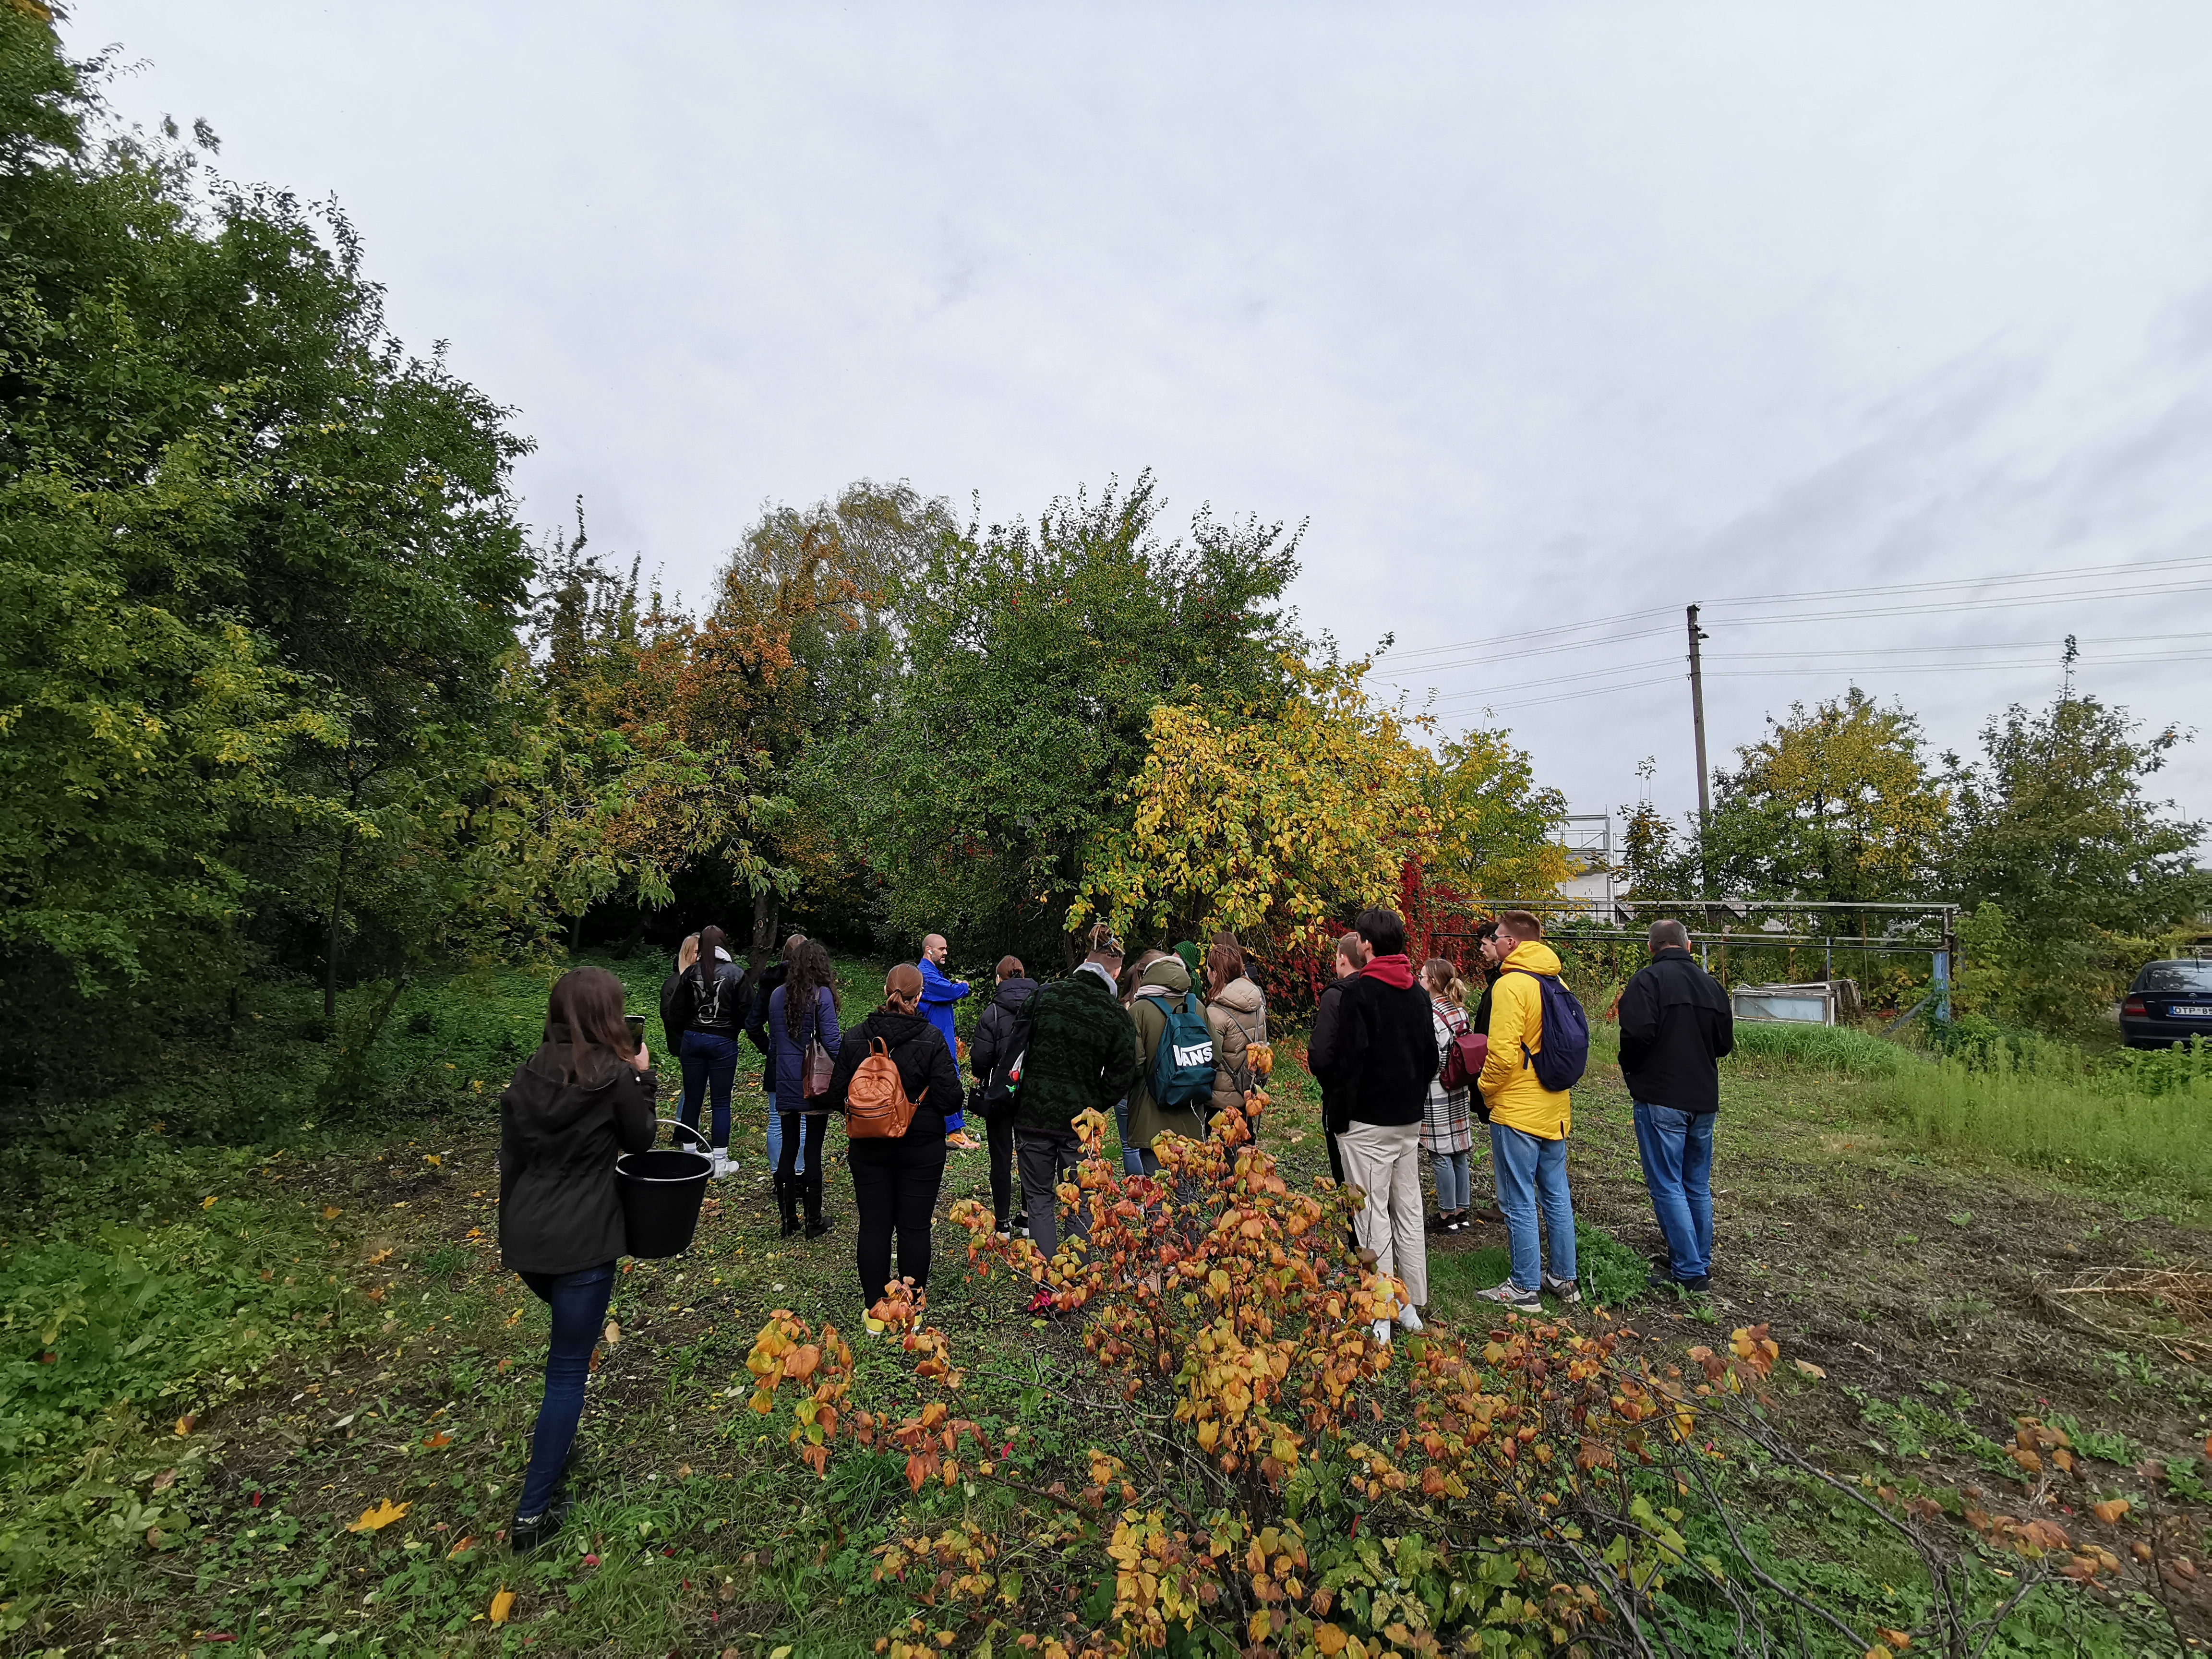 Participants explore the territory of the Kaunas fortress park